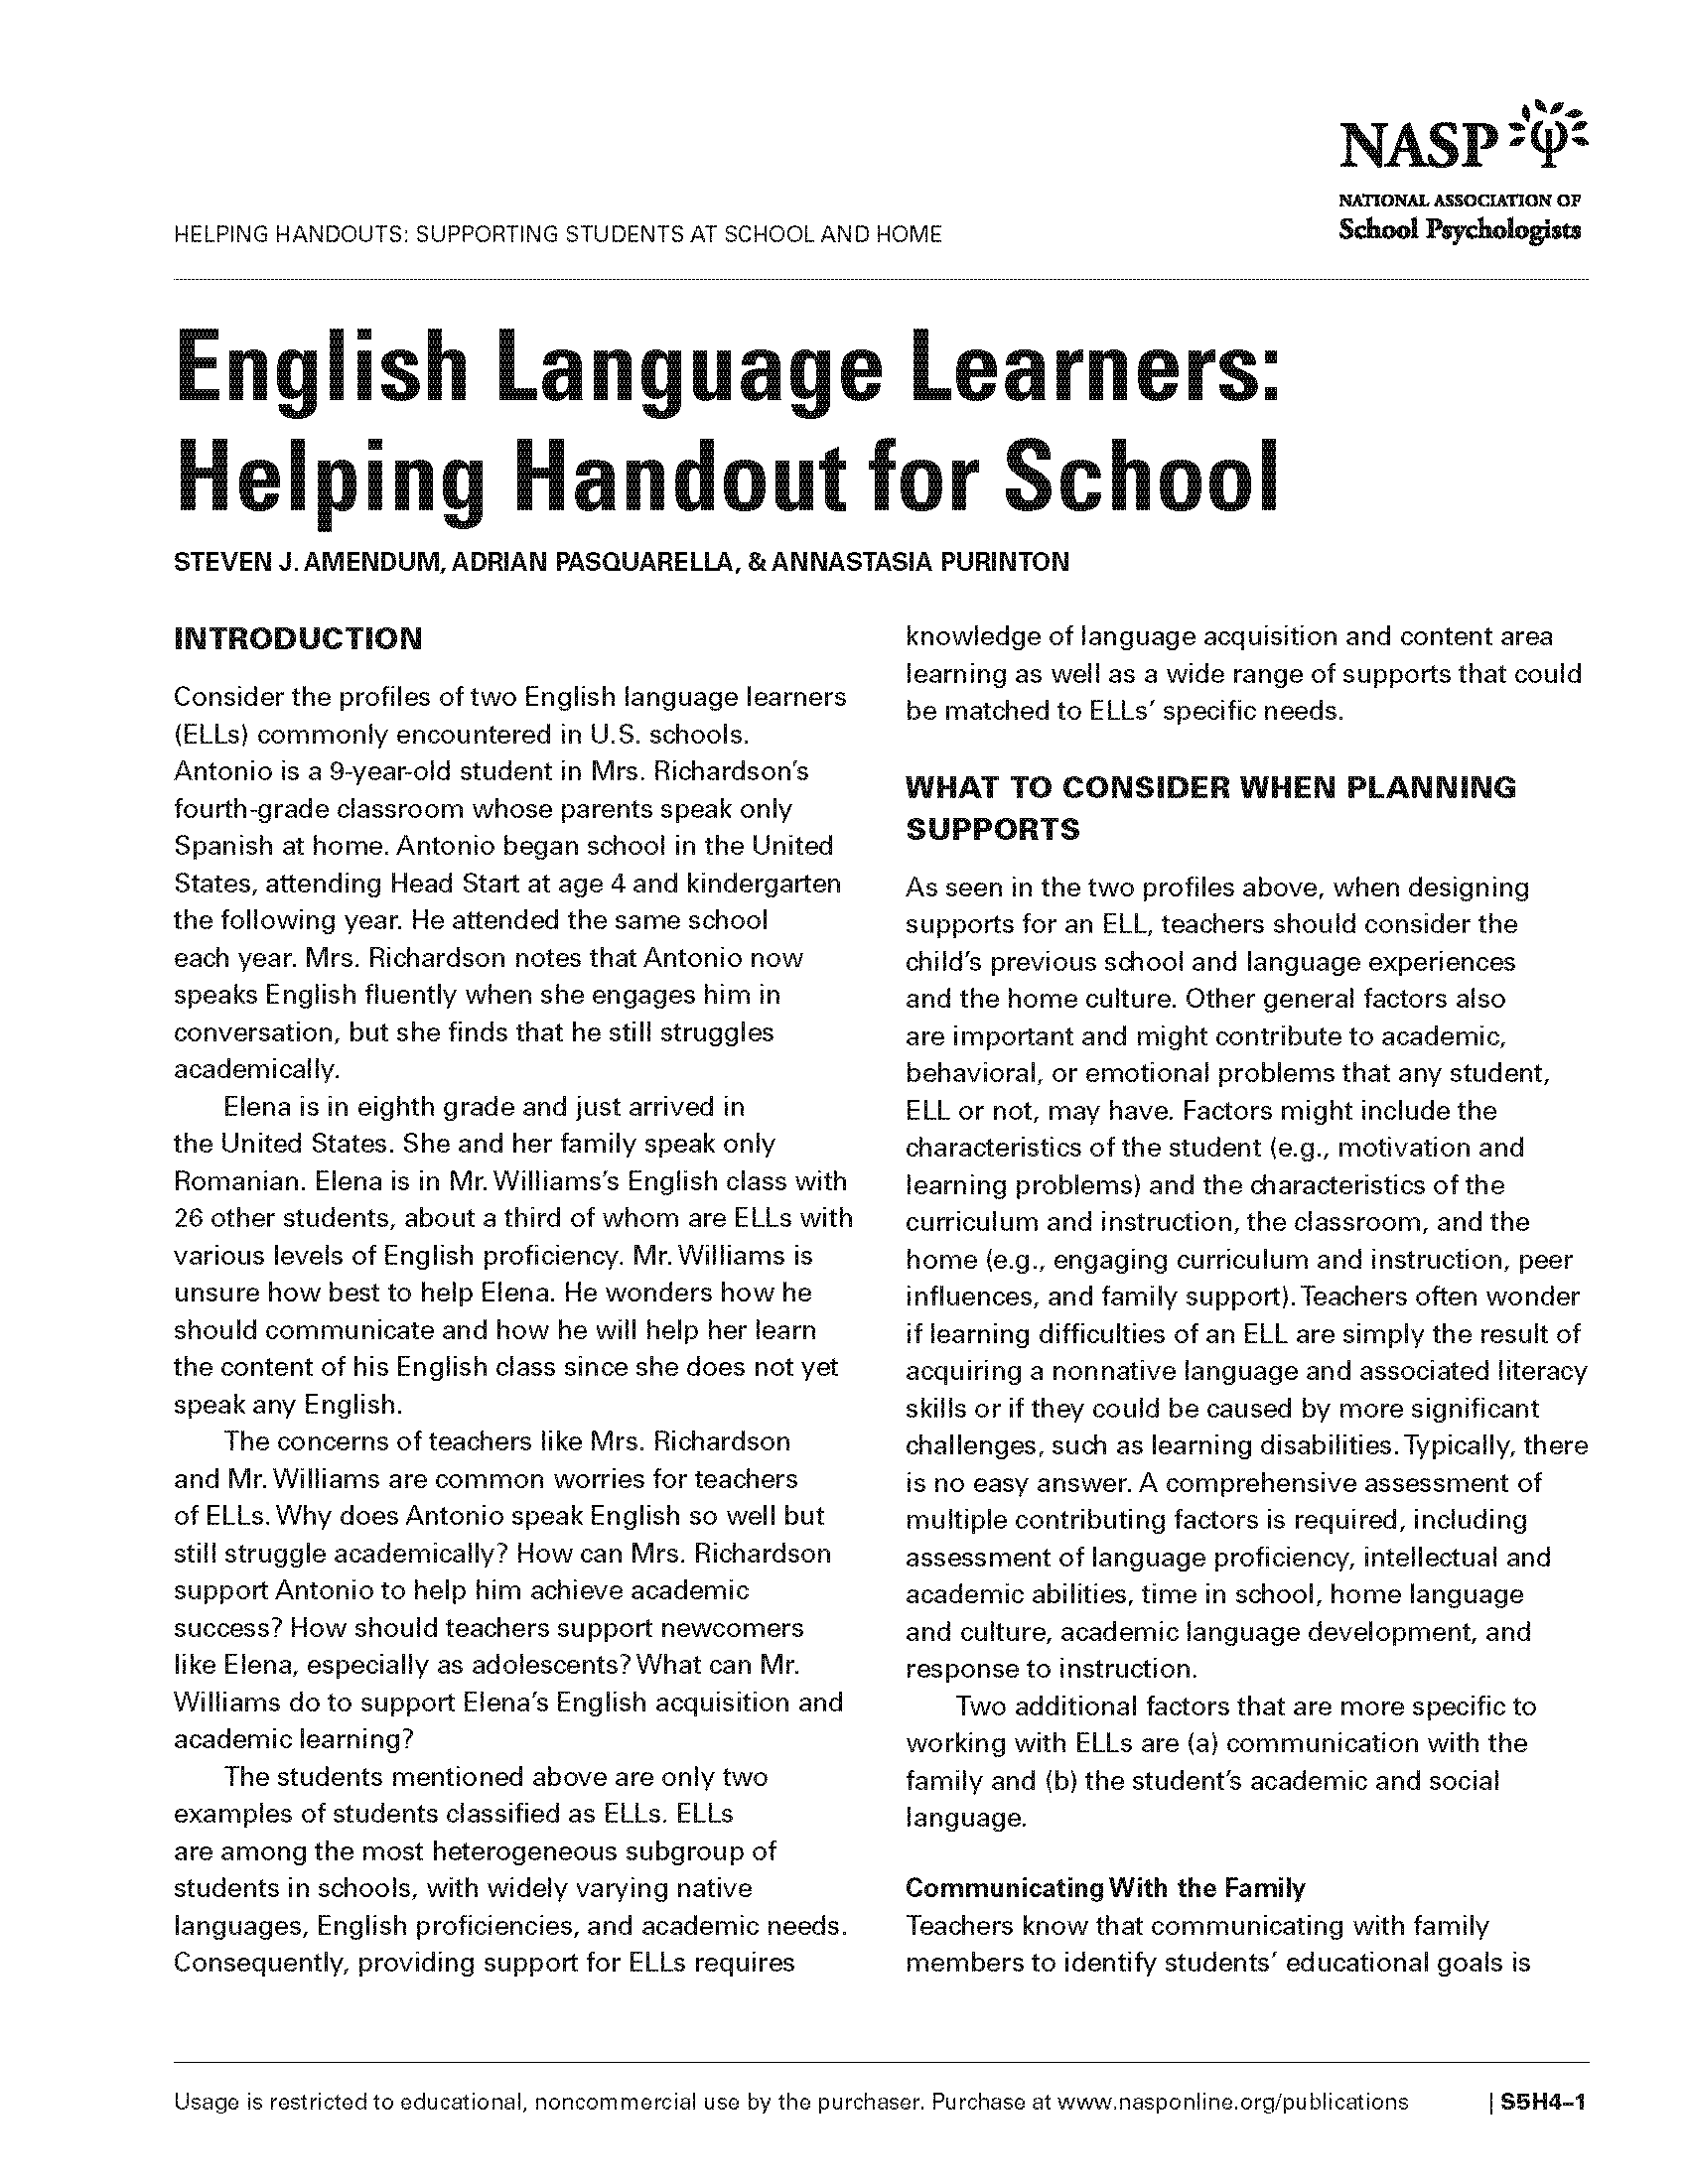 English Language Learners: Helping Handout for School